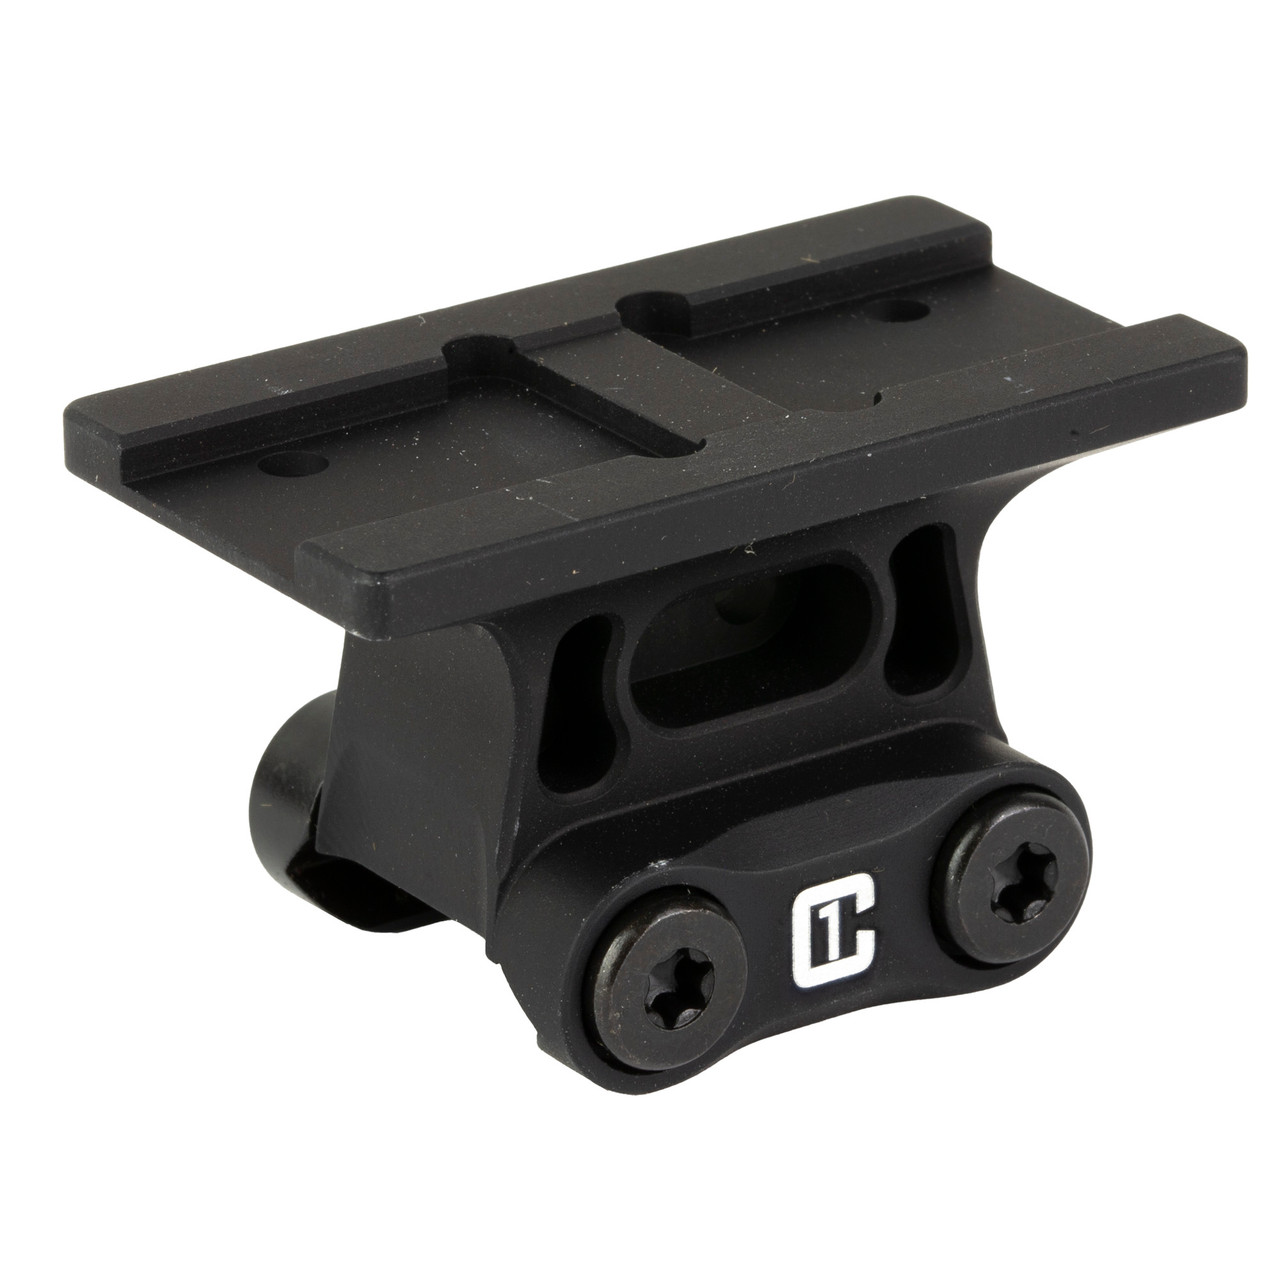 Badger Cond One T2 Mount 1.43" Blk